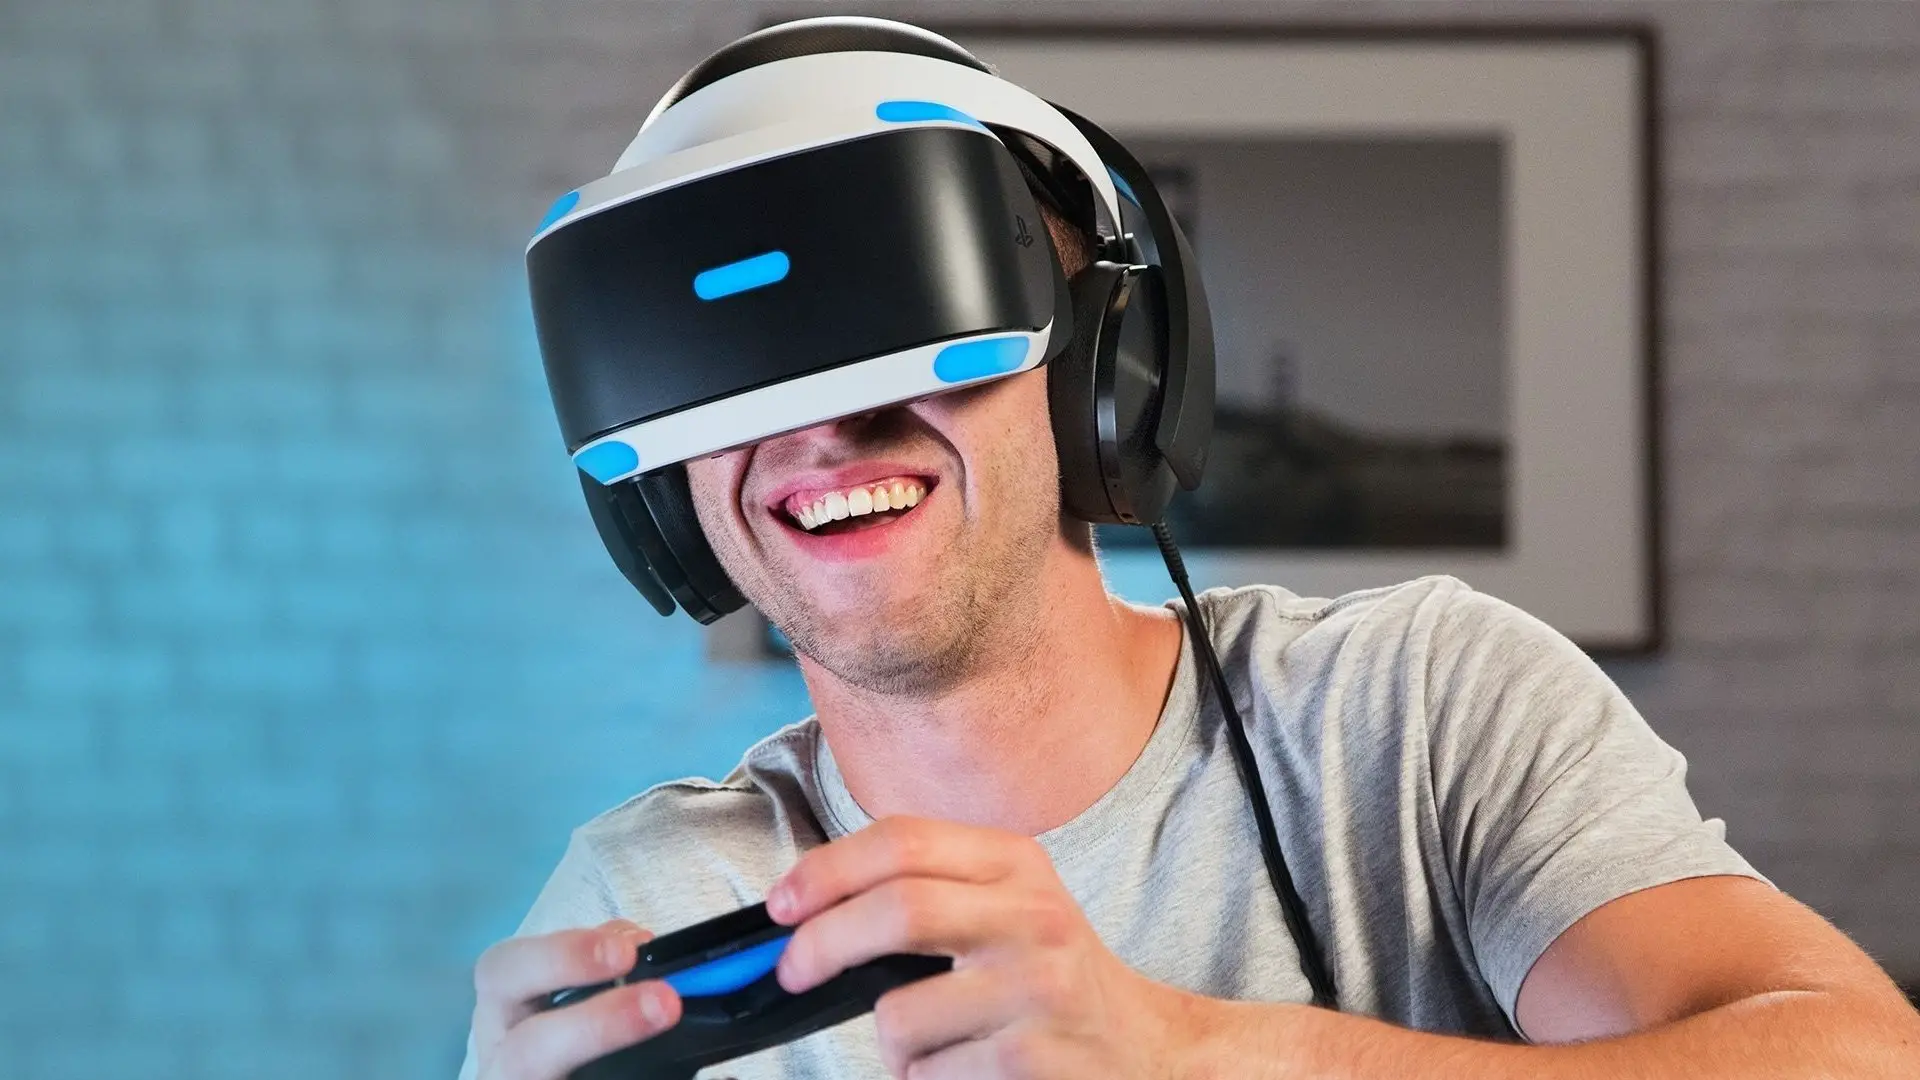 Top VR headset buyer’s guide HTC Vive Focus 3, Oculus Quest 2, and more